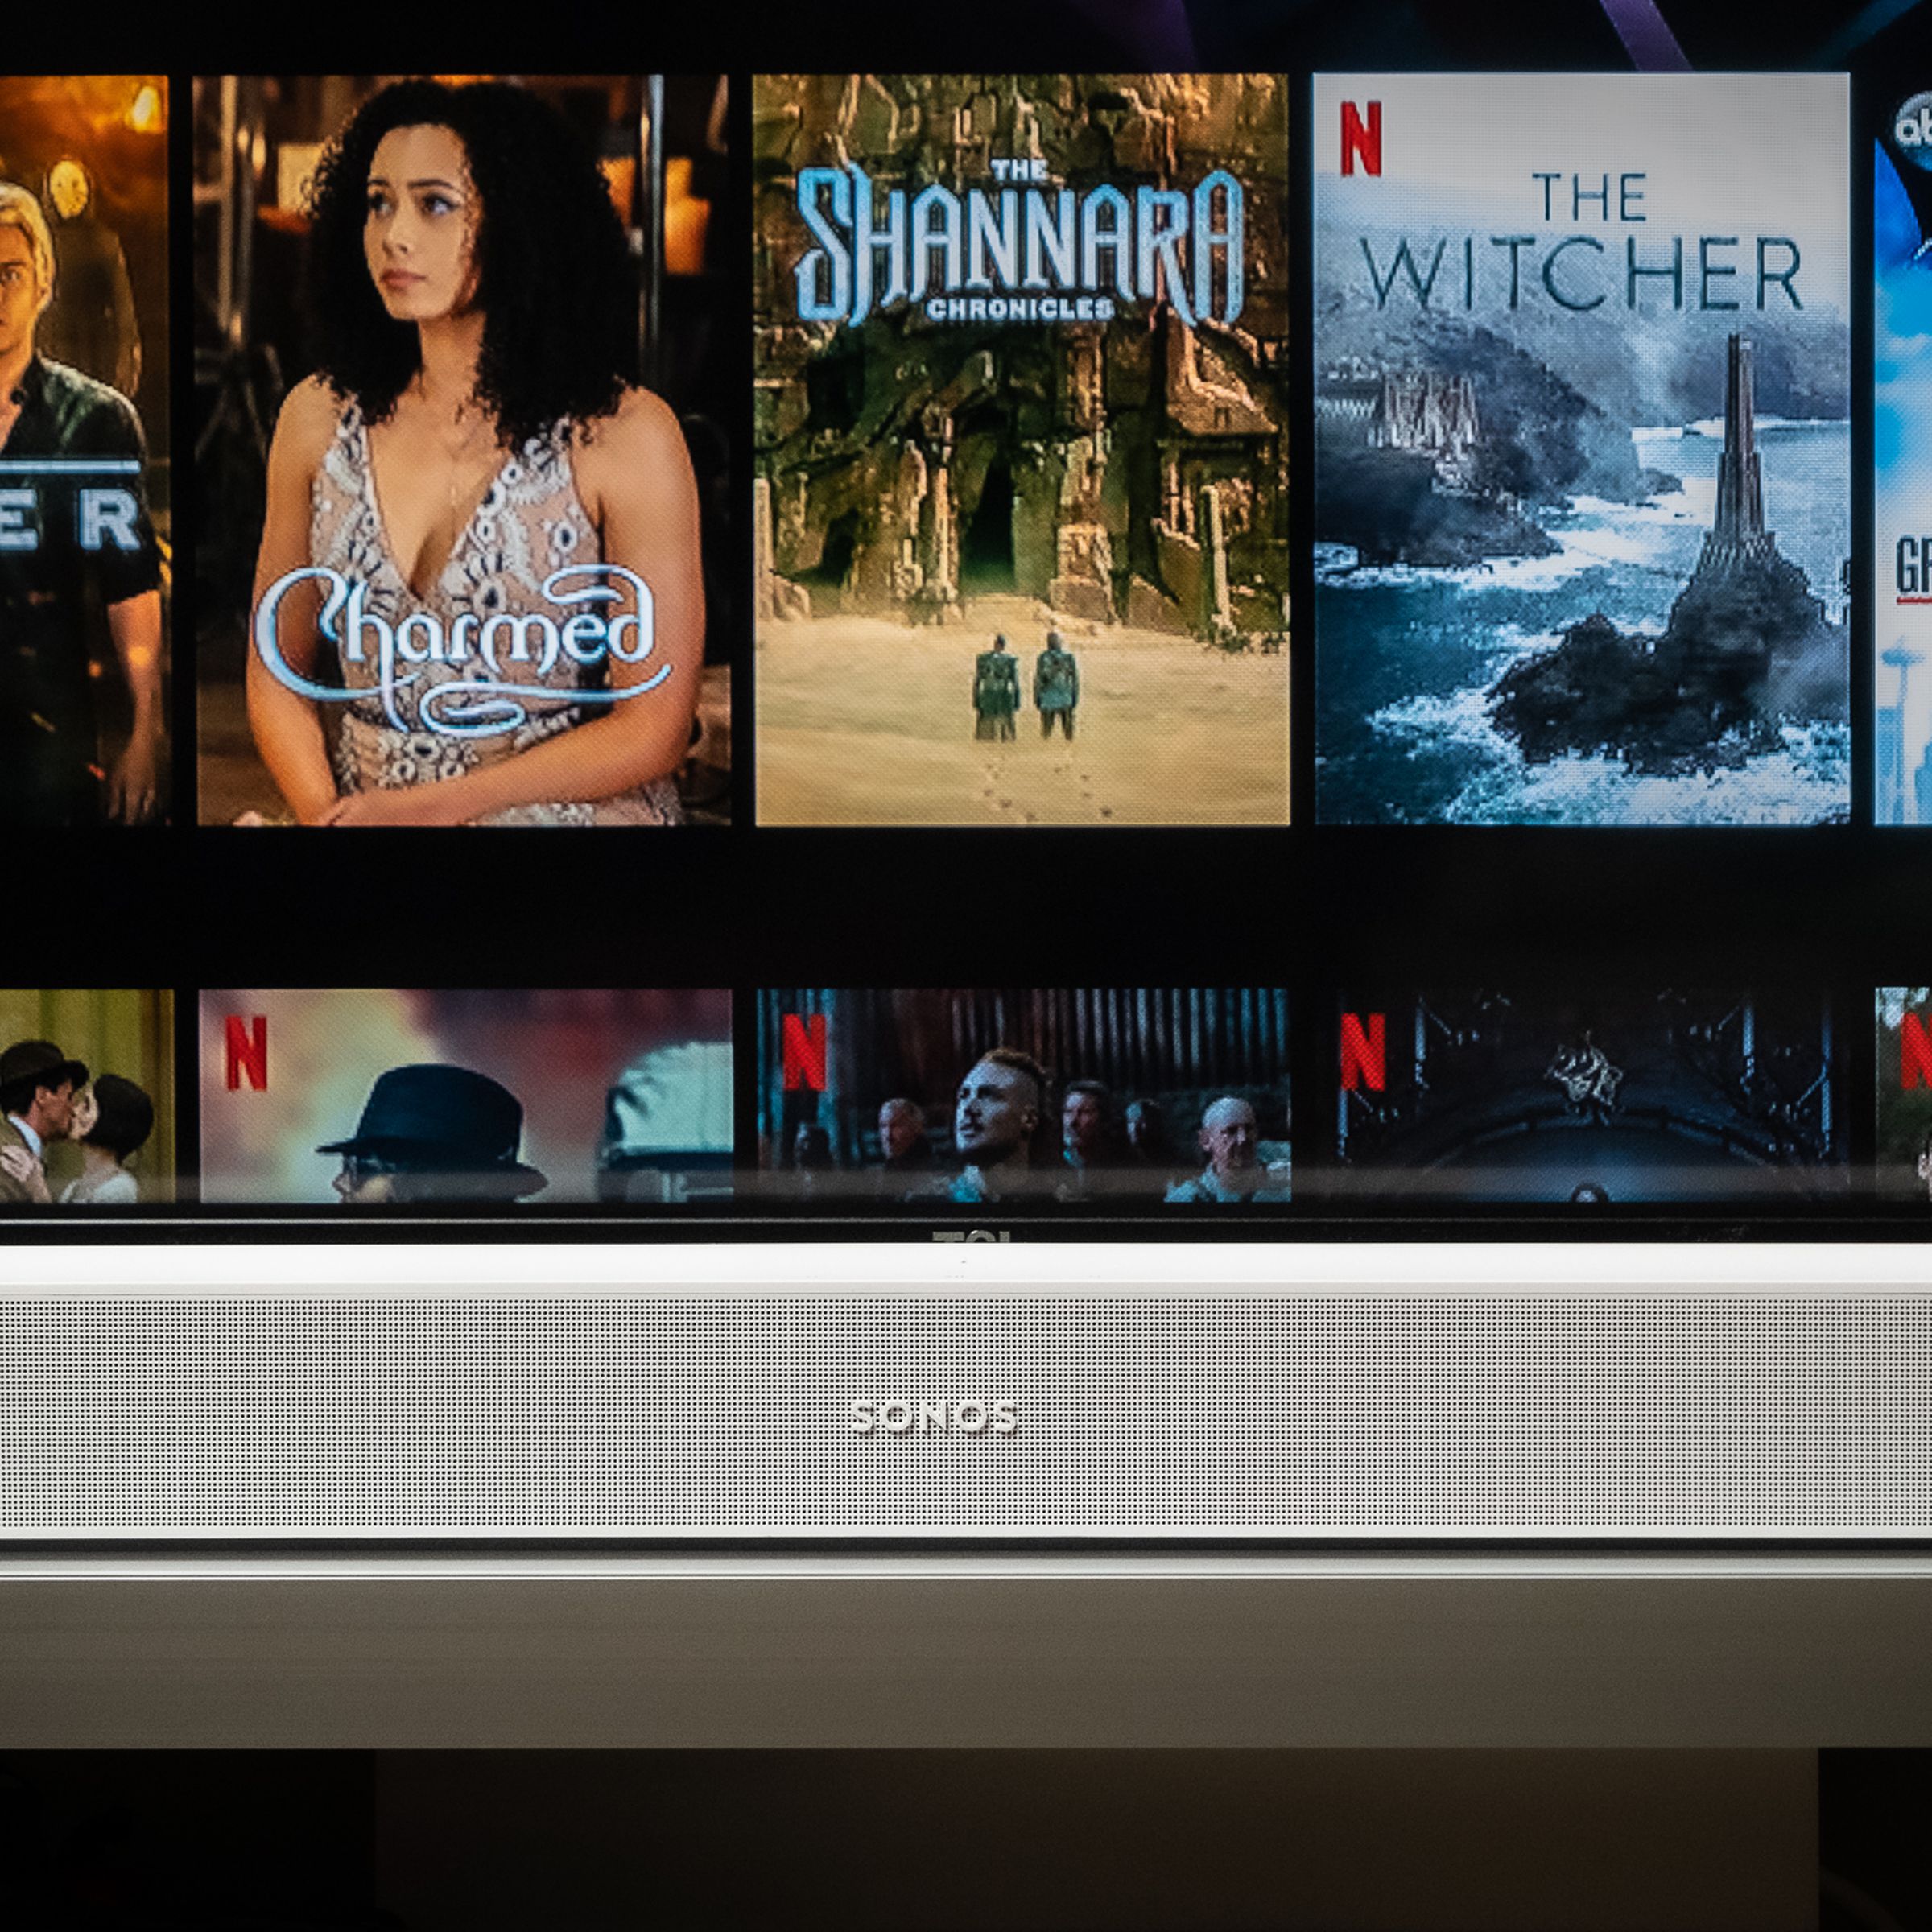 An image of the Sonos Beam soundbar with a TV screen in the background.